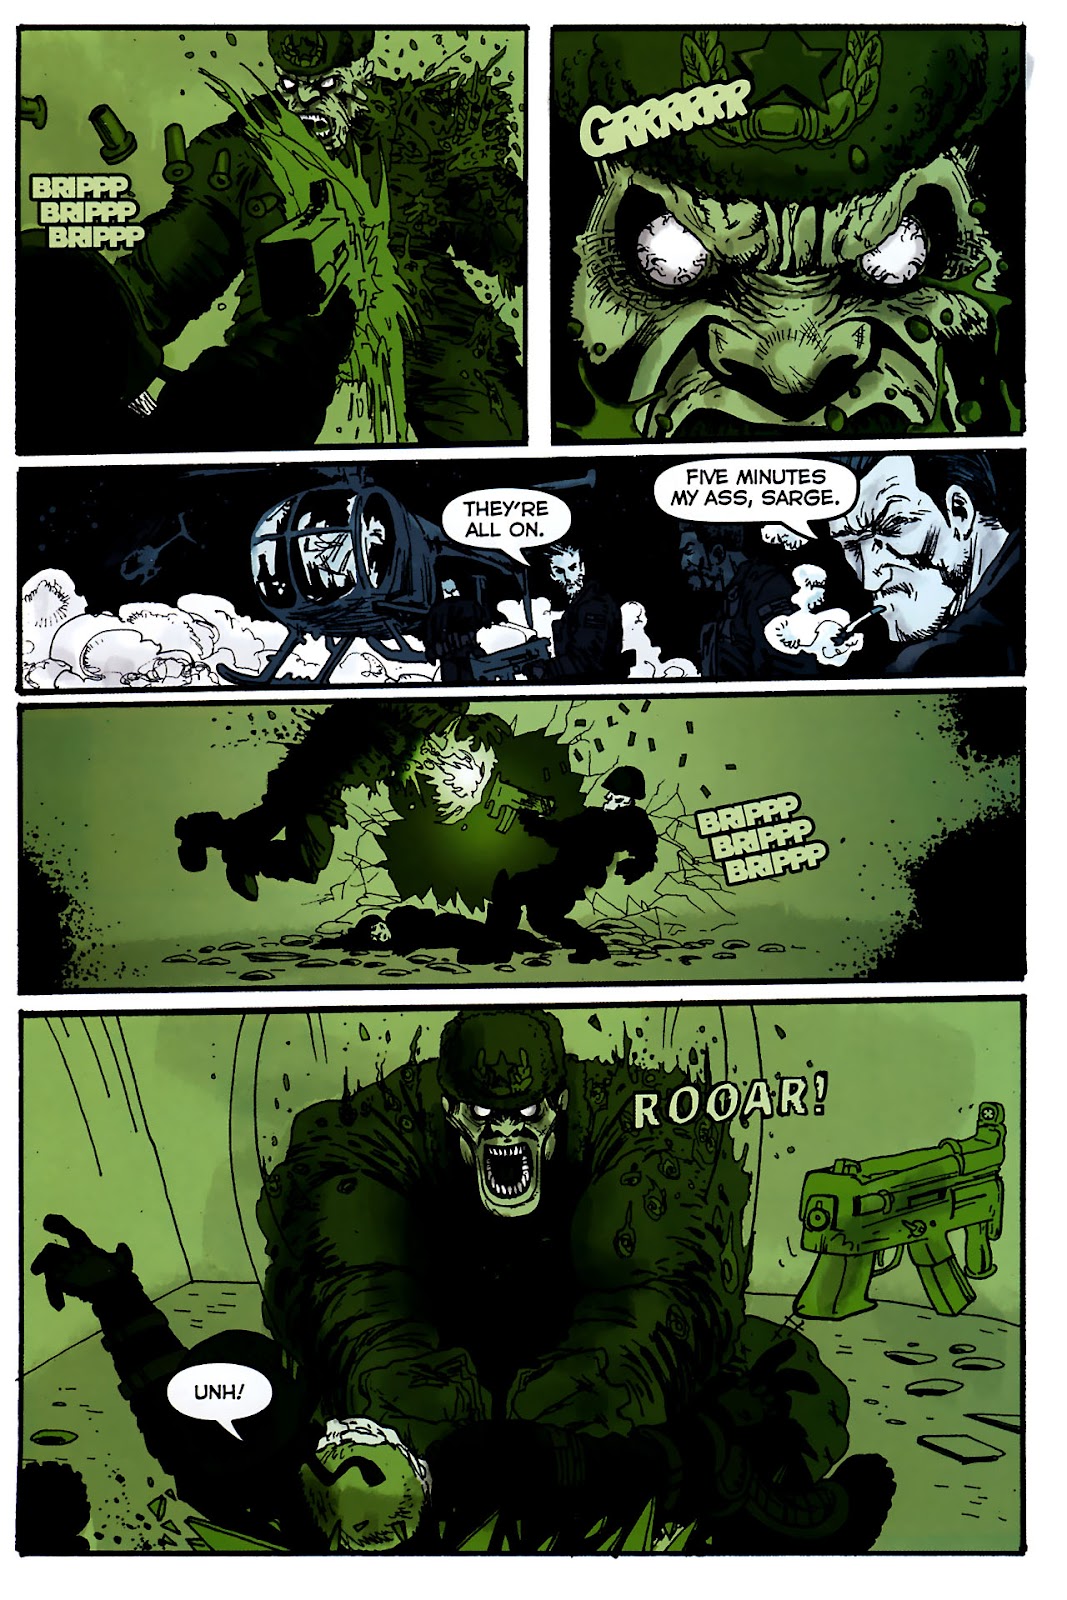 Grunts (2006) issue 3 - Page 19